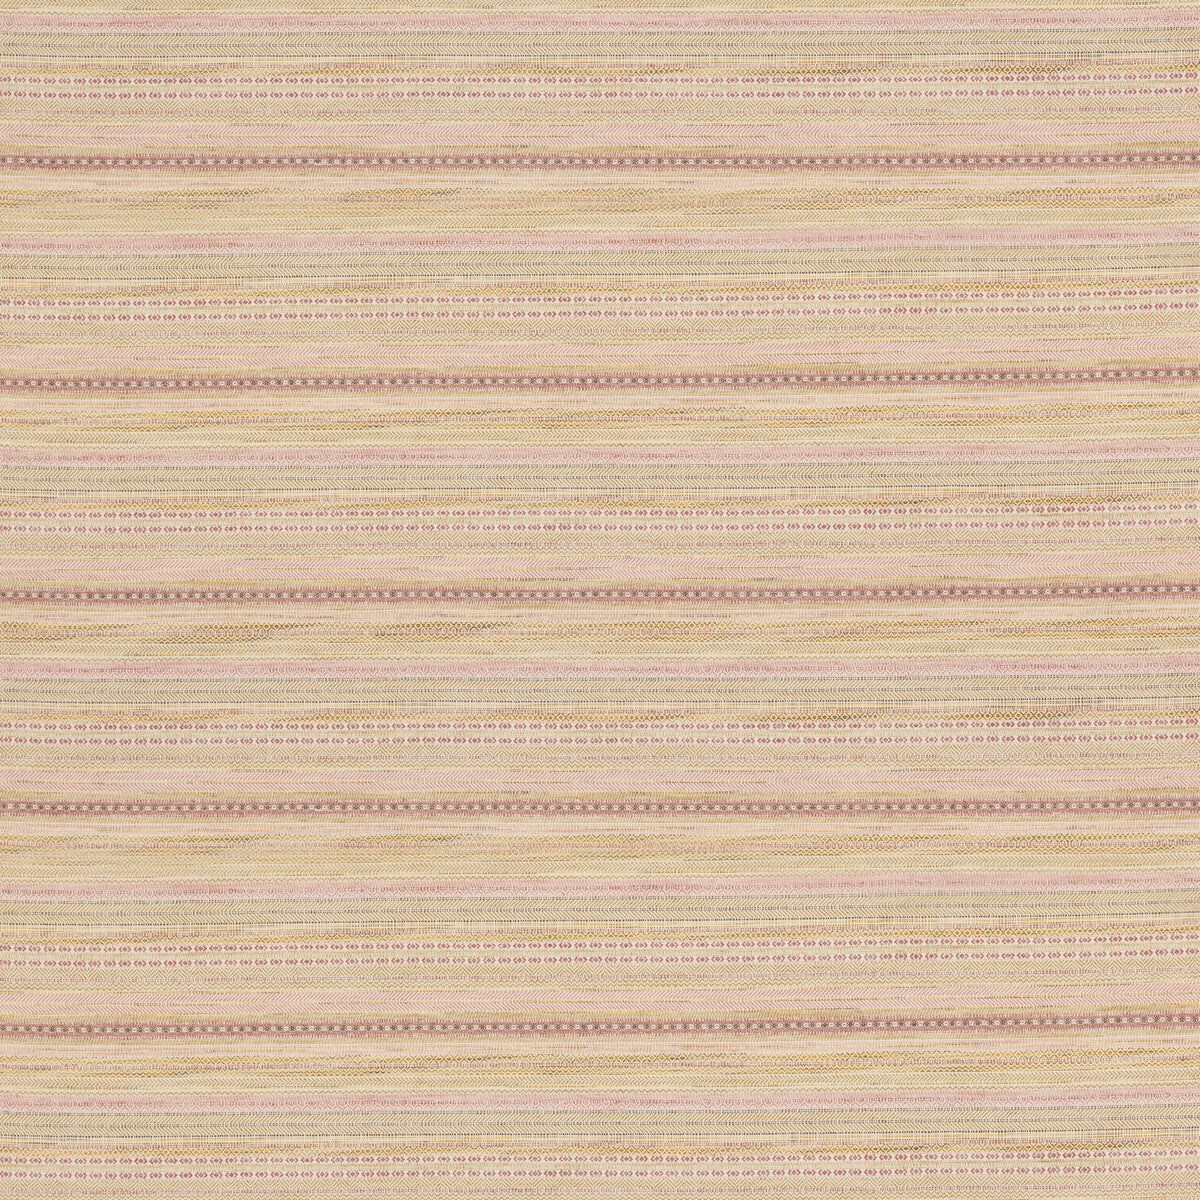 Fairfax fabric in ochre/coral color - pattern BF11036.5.0 - by G P &amp; J Baker in the Burford Weaves collection